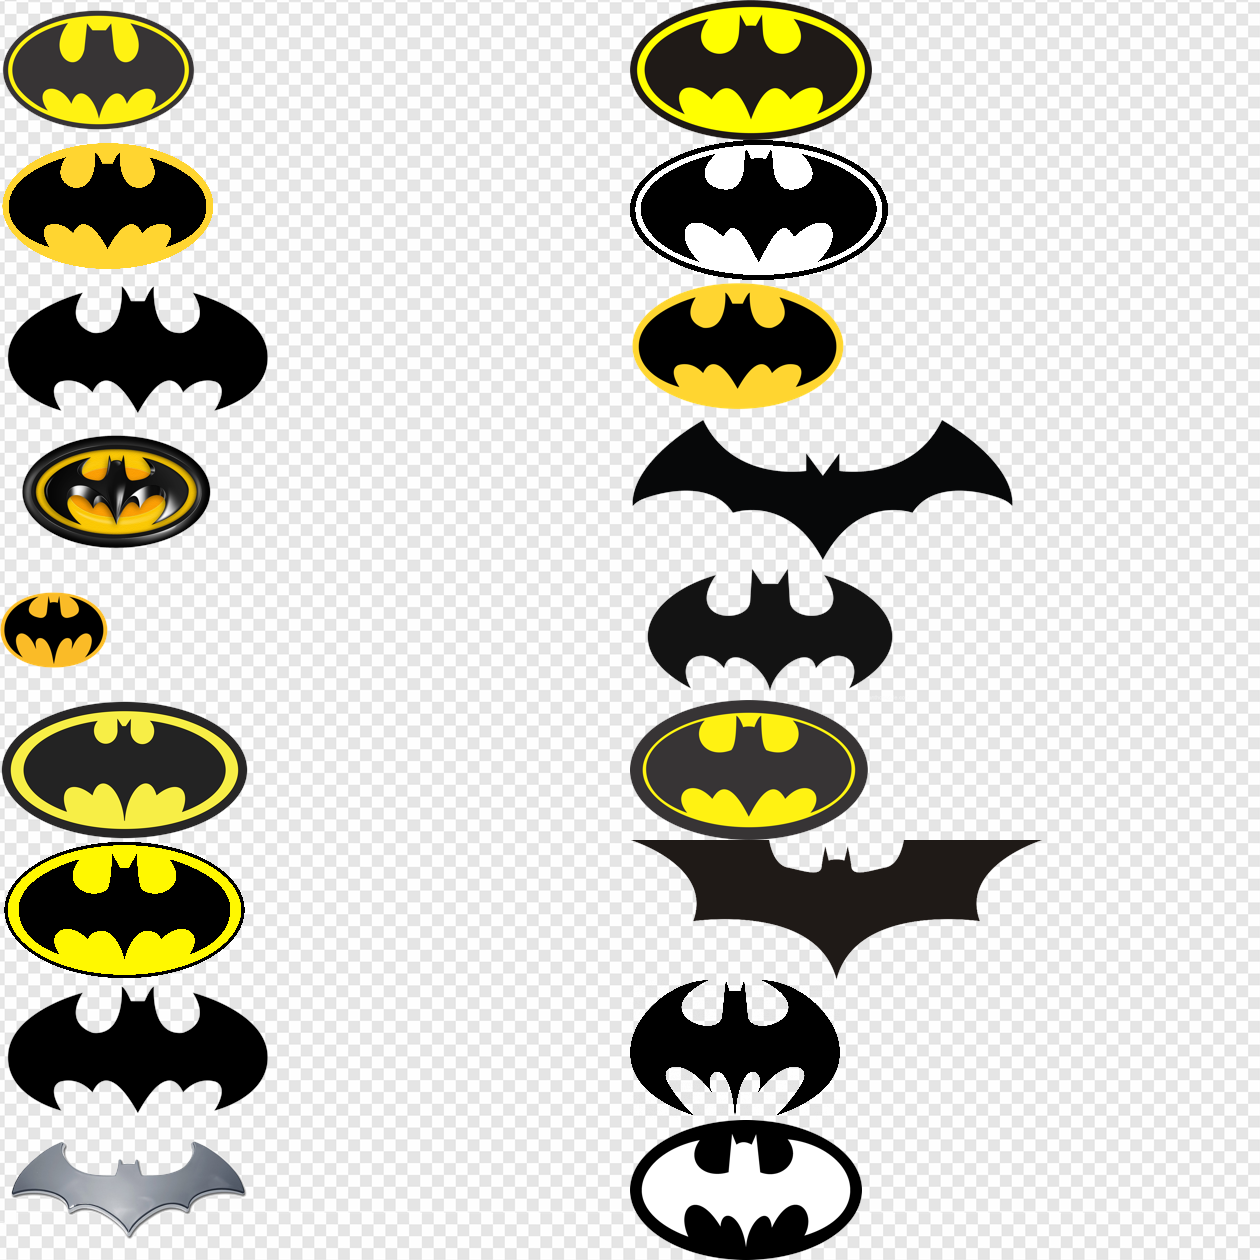 Free download Batman PNG Images,High quality